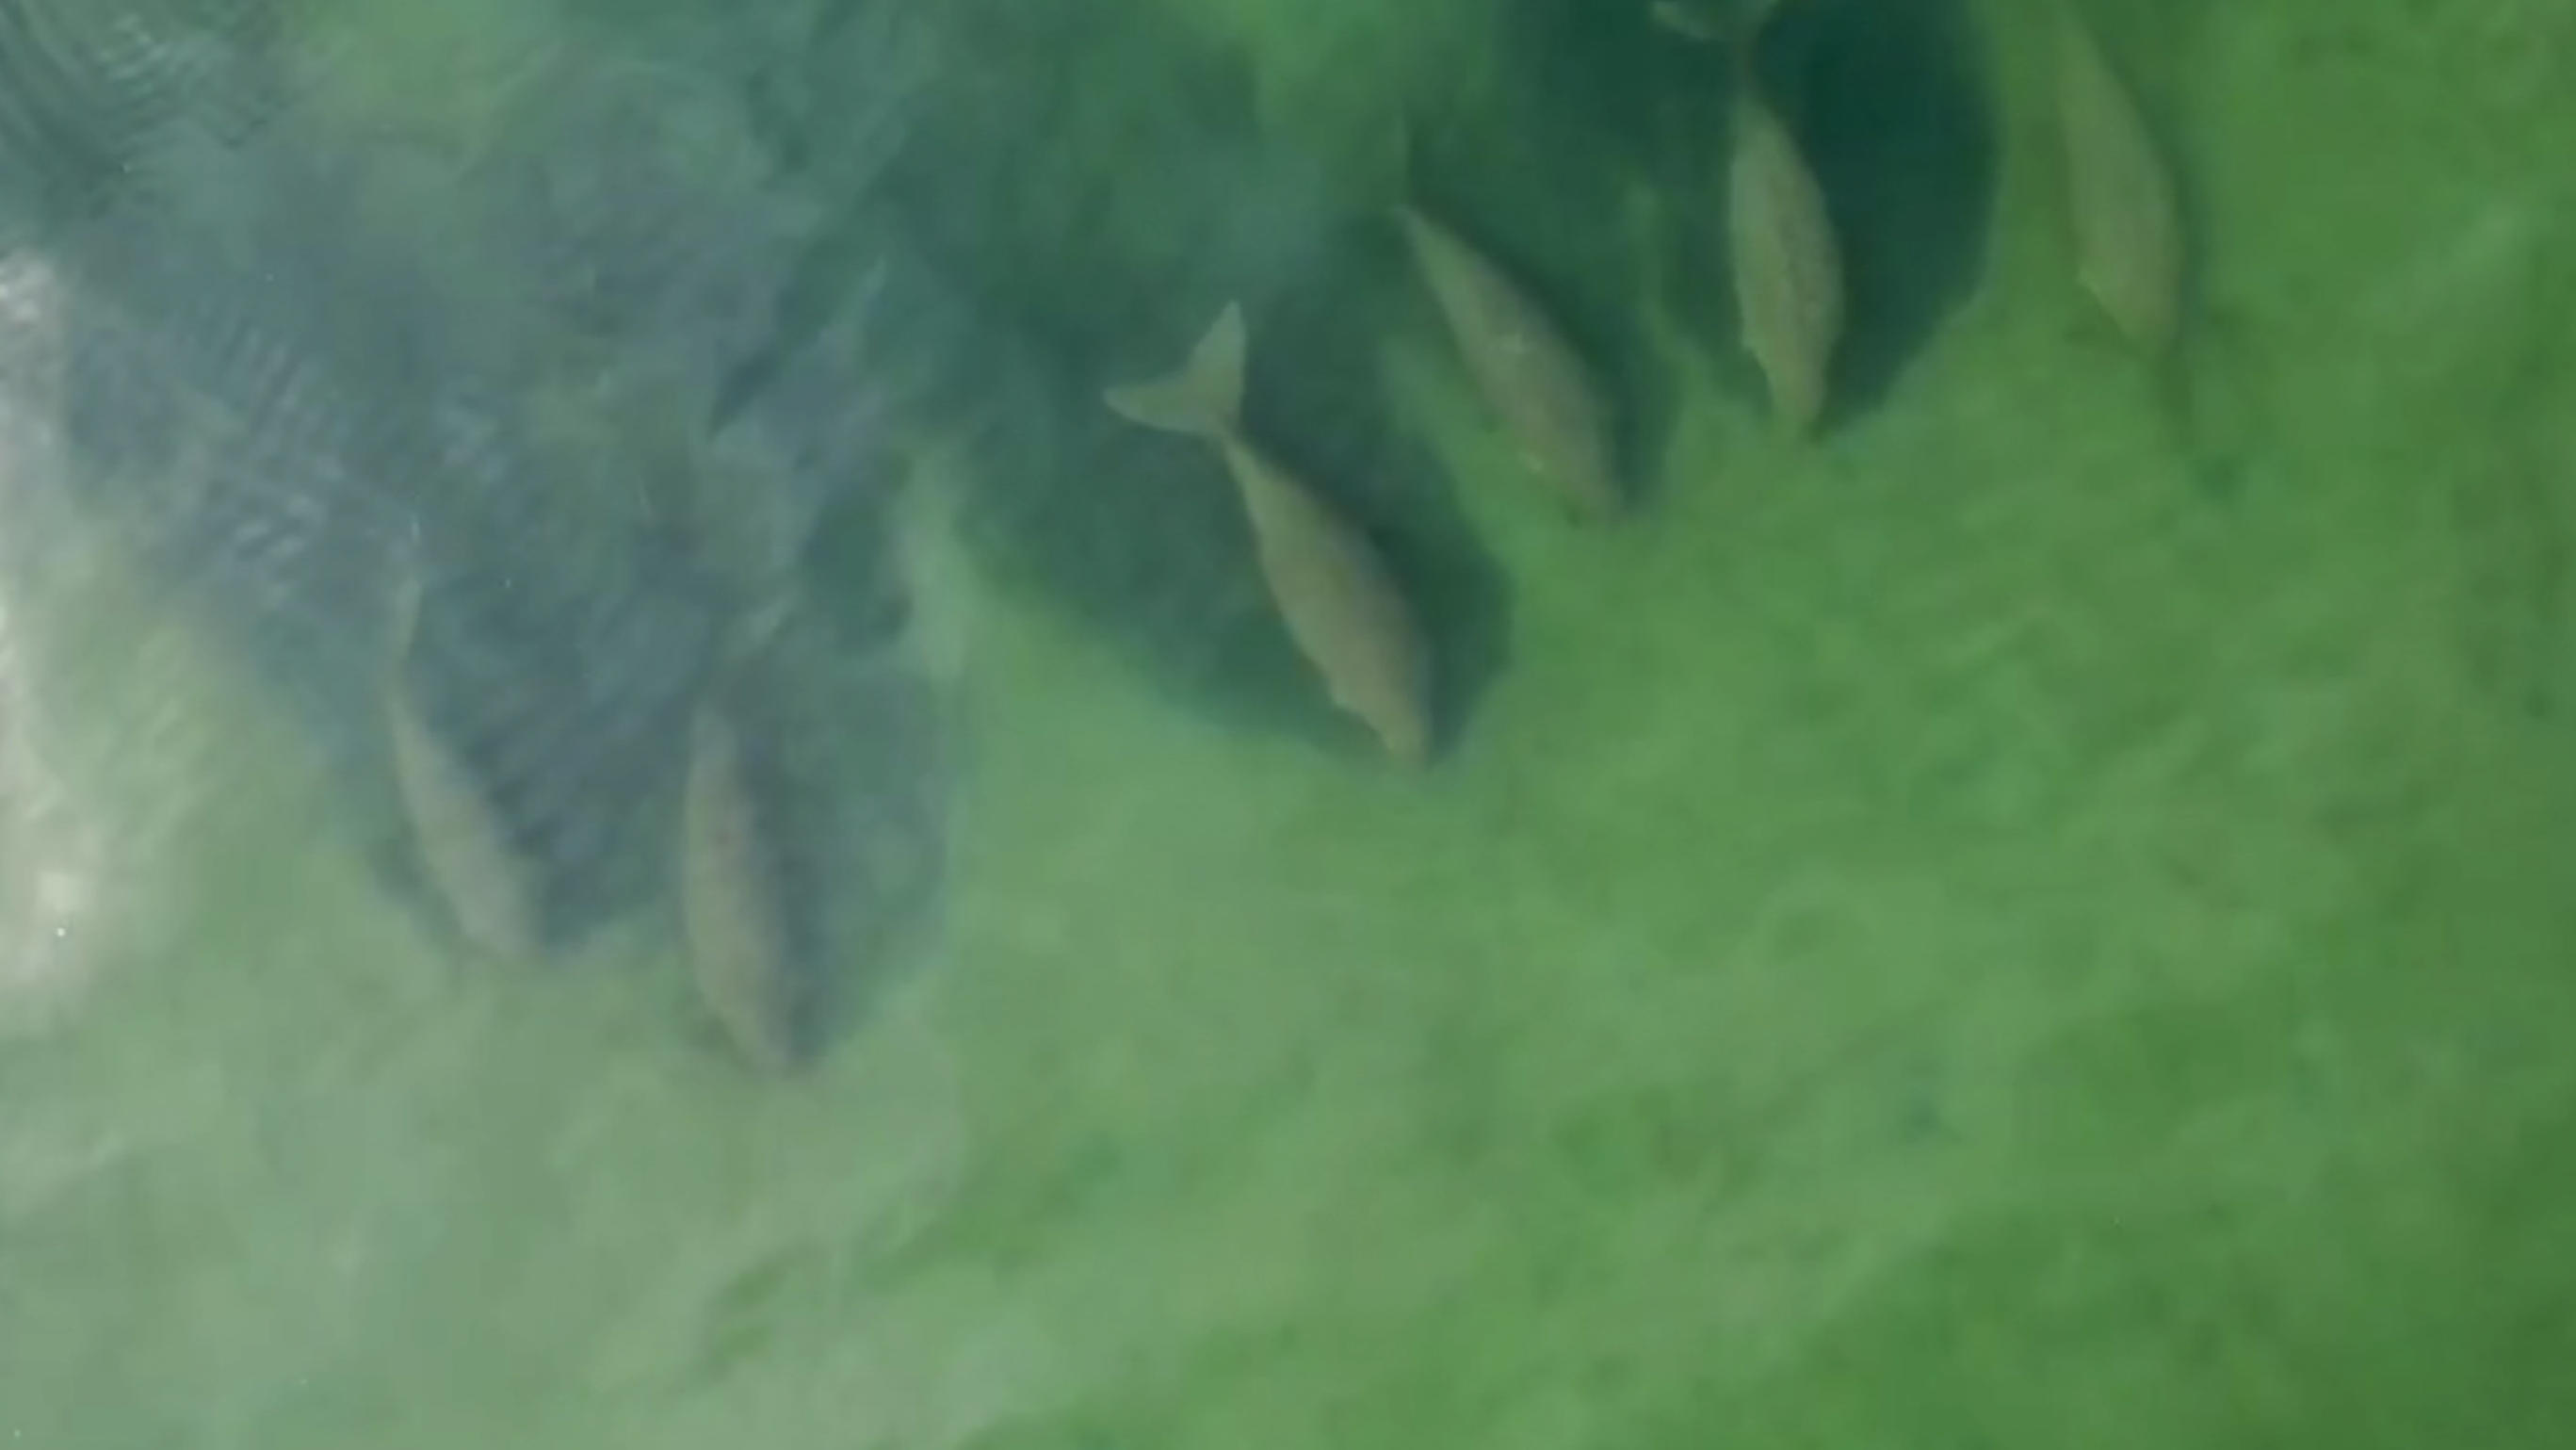 In this image taken from video taken April 22, 2020, by Thailandâ€™s Department of National Parks, Wildlife and Plant Conservation, six dugongs are swimming together, part of a larger group of dugongs cruising slowly in the shallow waters in the area